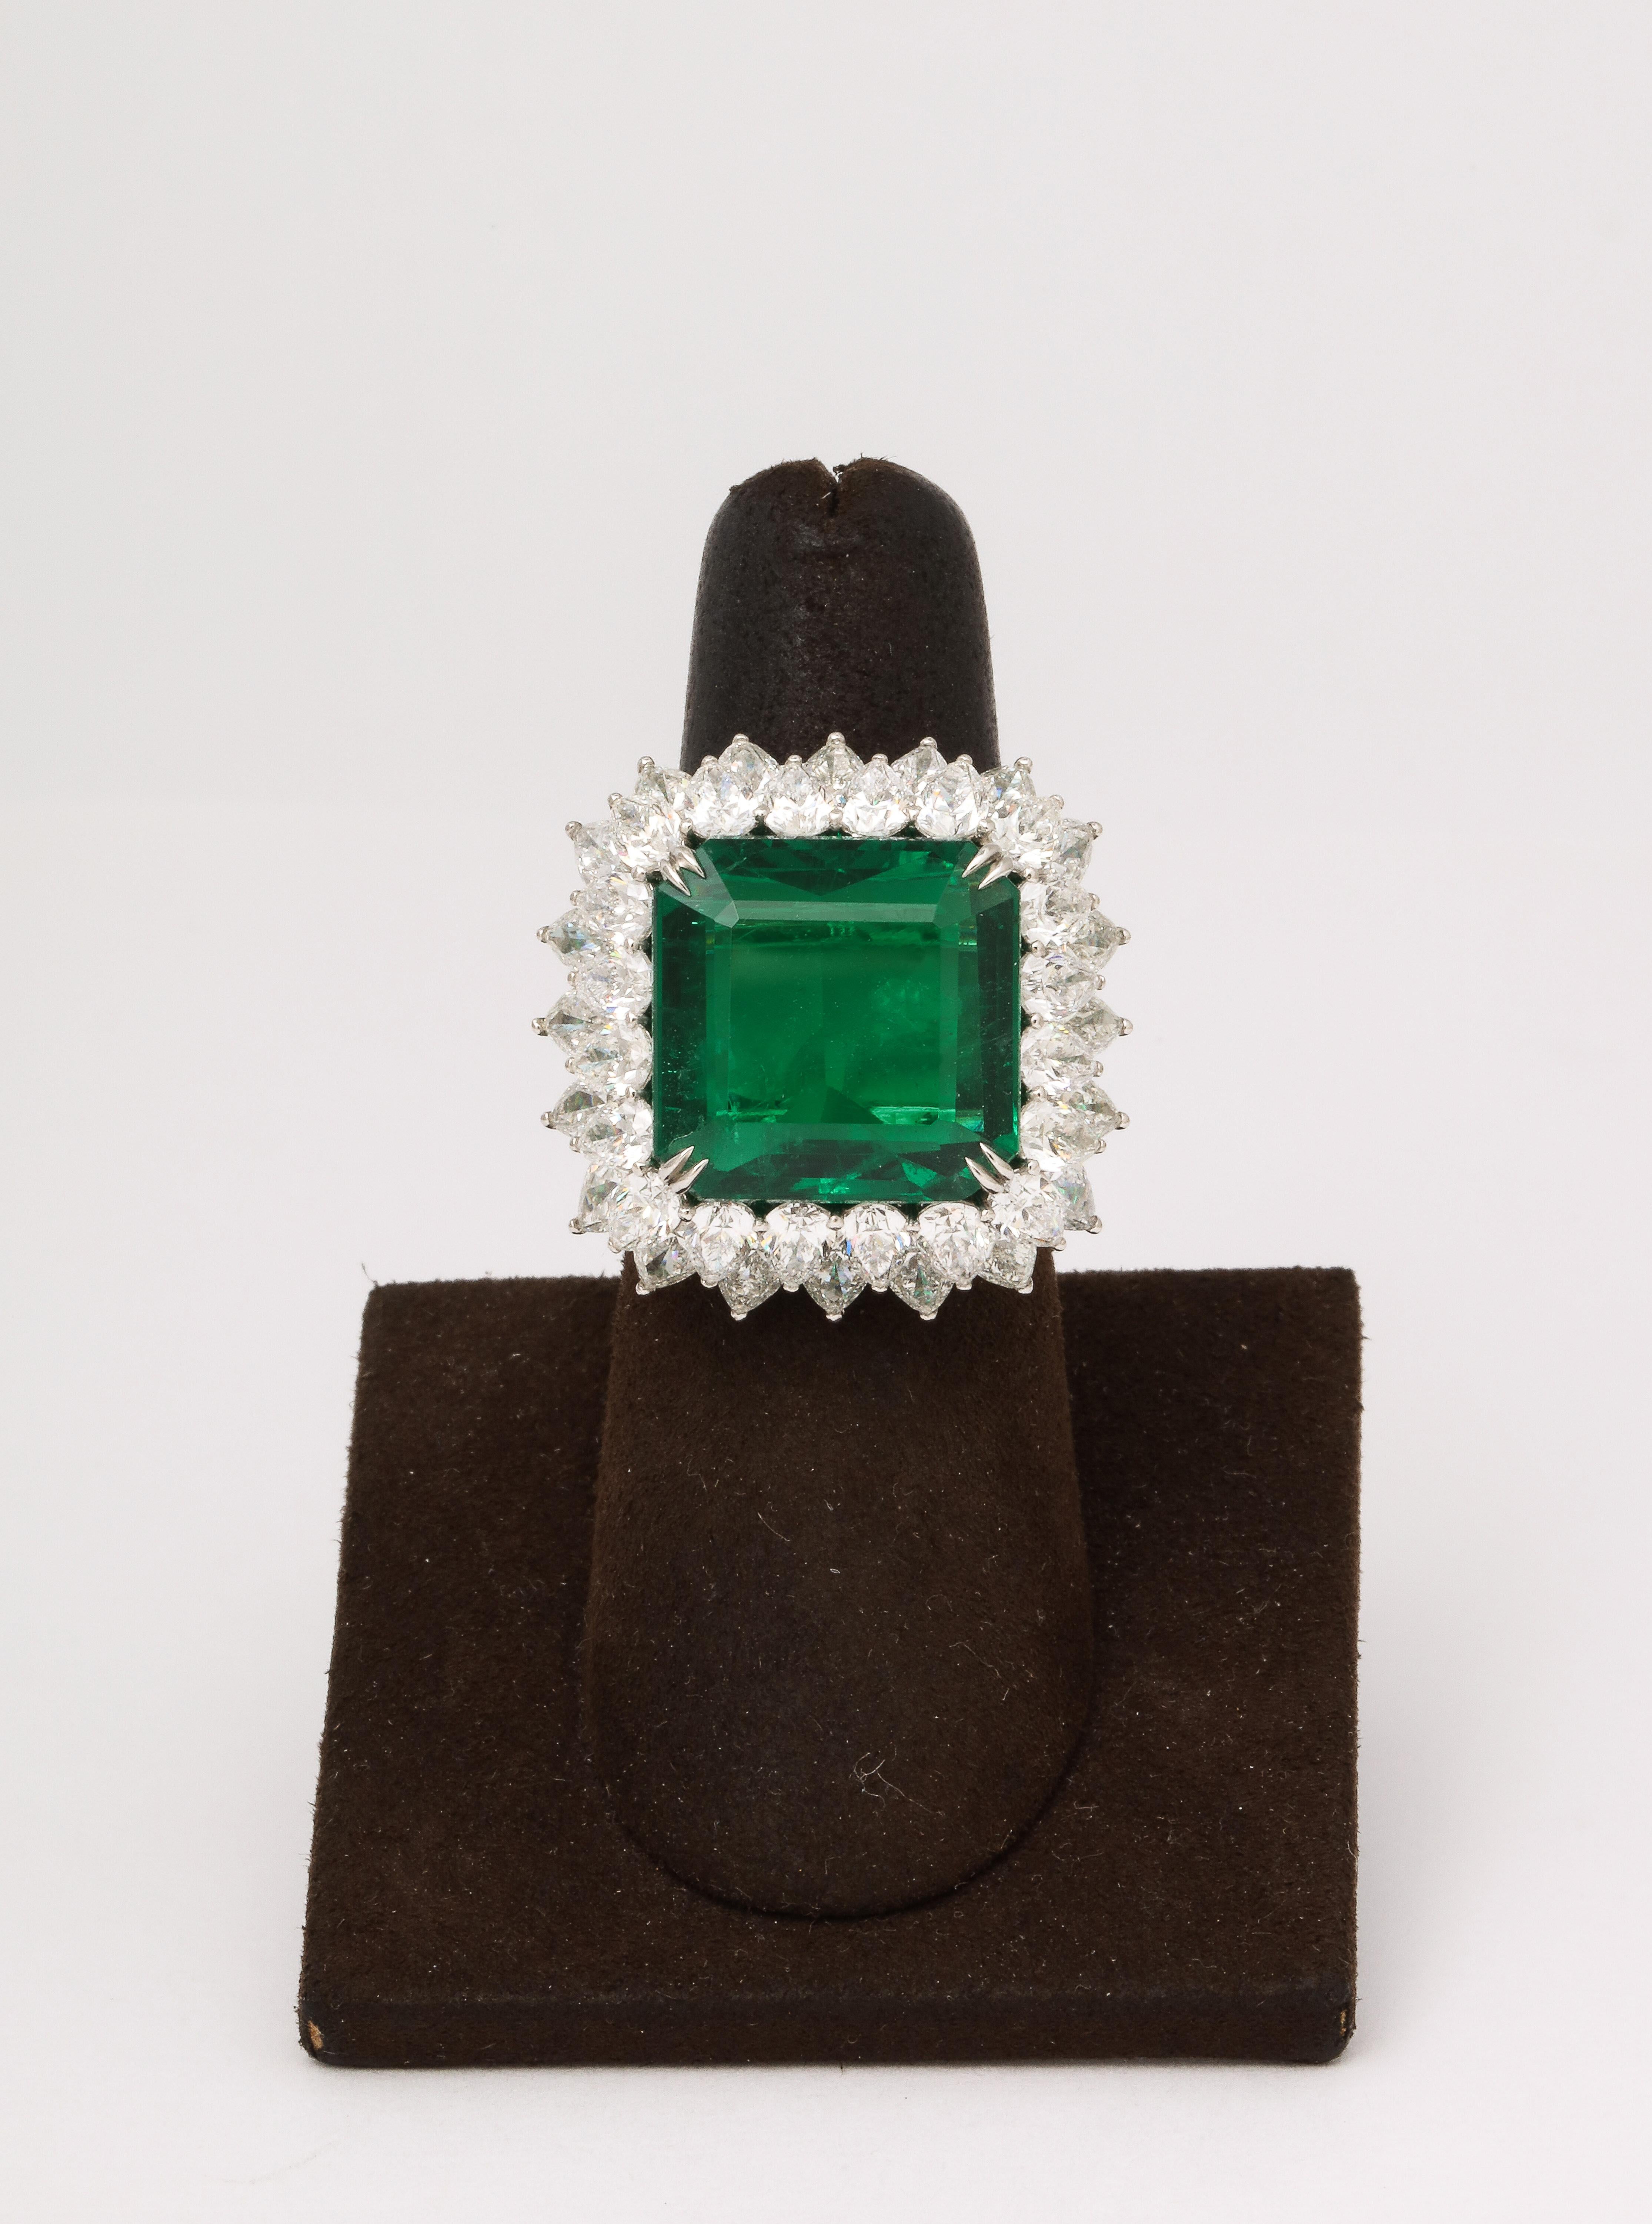 
A MAGNIFICENT ring! 

GIA Certified Fine 13.20 carat Emerald cut Emerald set with 2 rows of white pear shape diamonds weighing 9.13 carats. 

Meticulously designed and set in platinum. 

The ring is just under an inch in length and width.